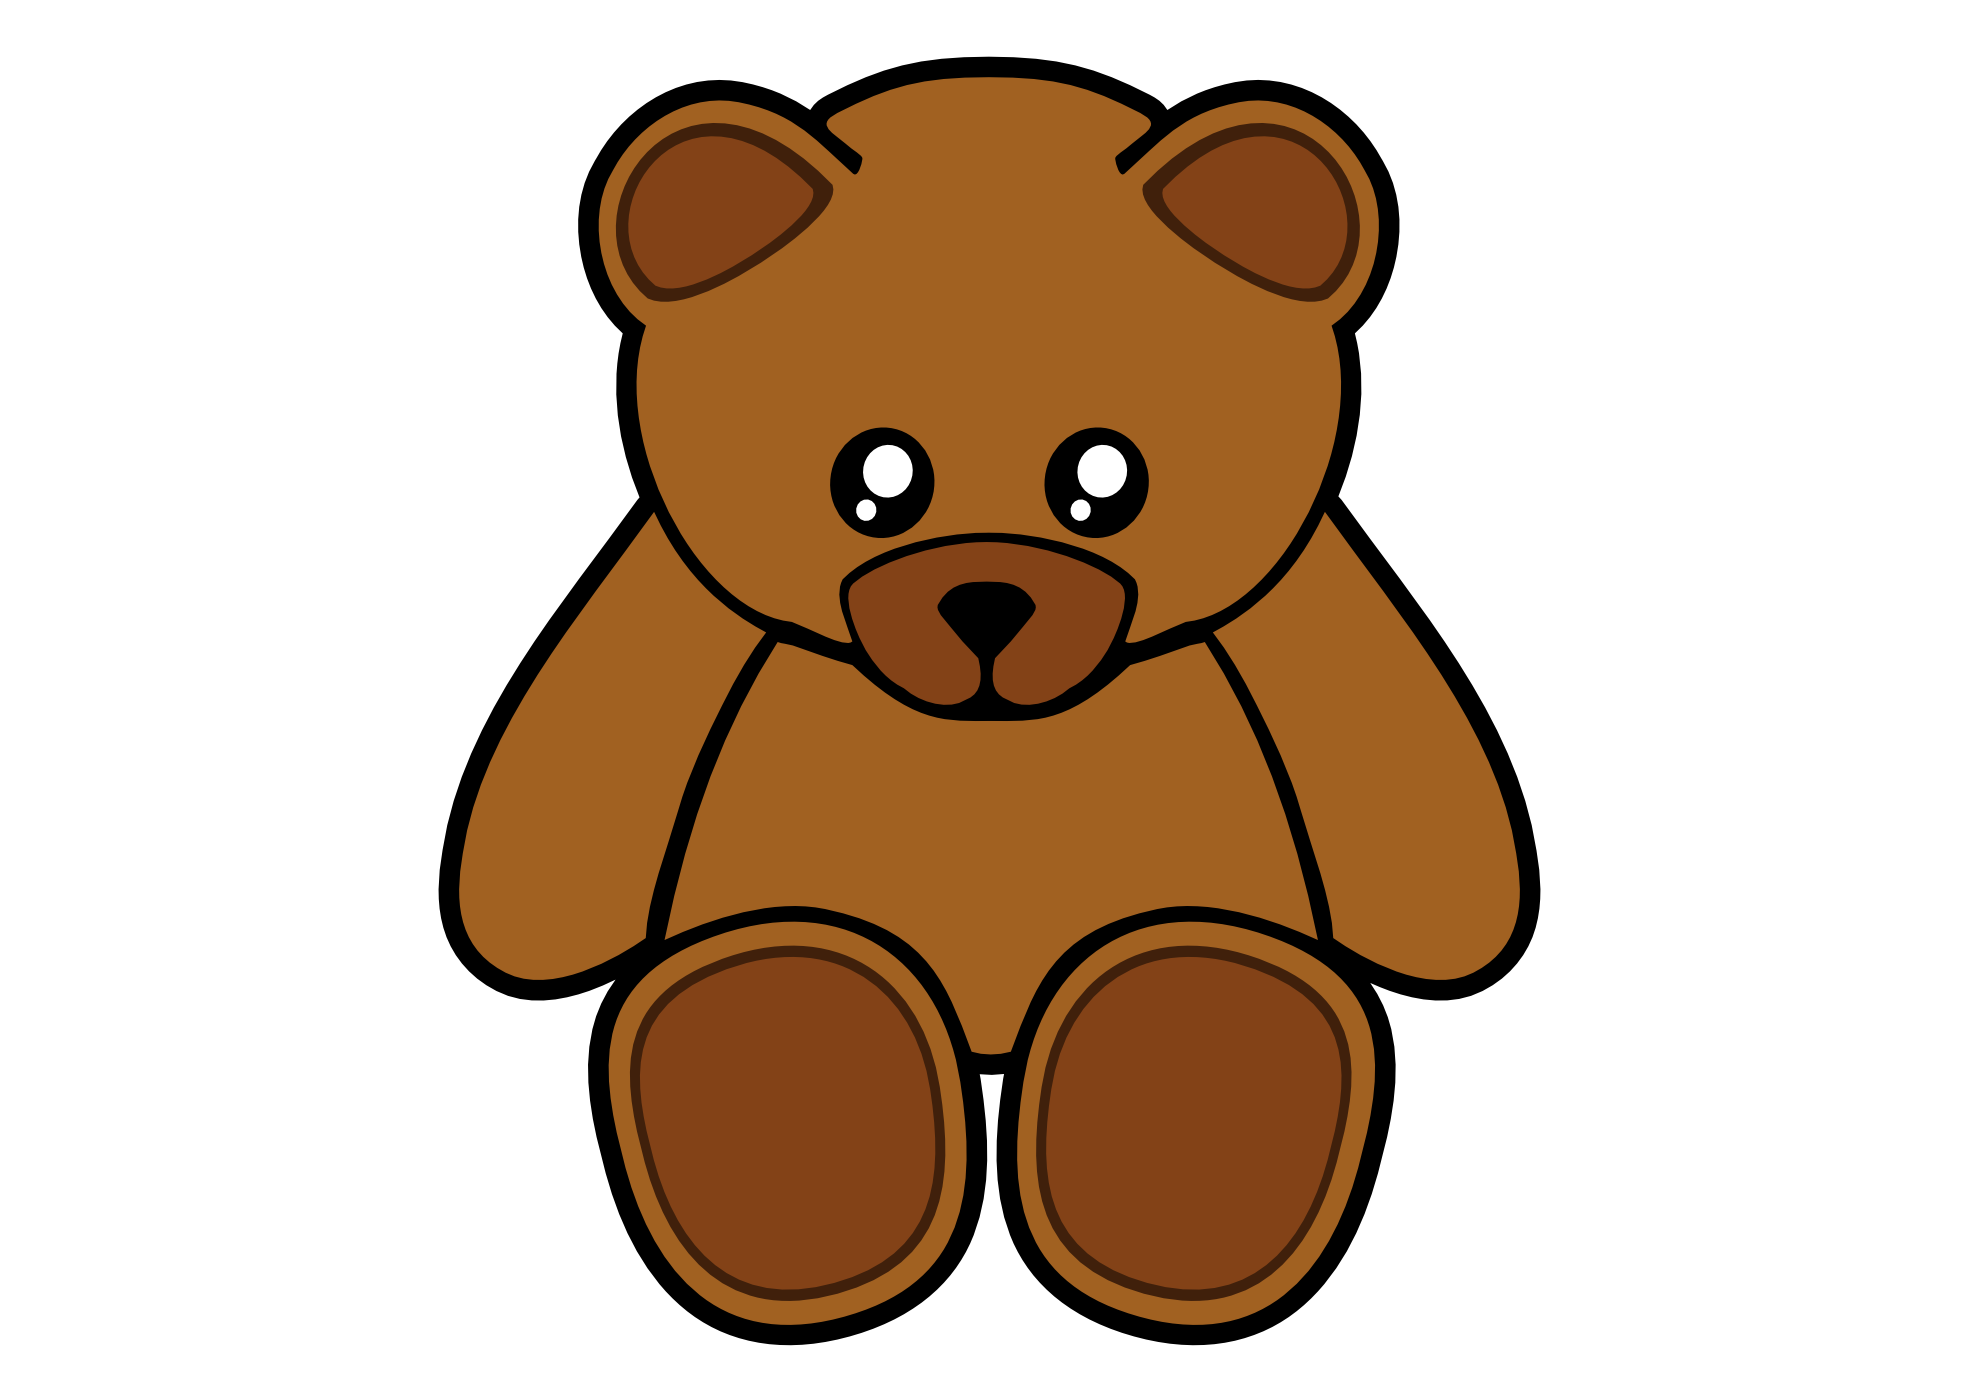 Cartoon Pictures Of Teddy Bears - ClipArt Best.